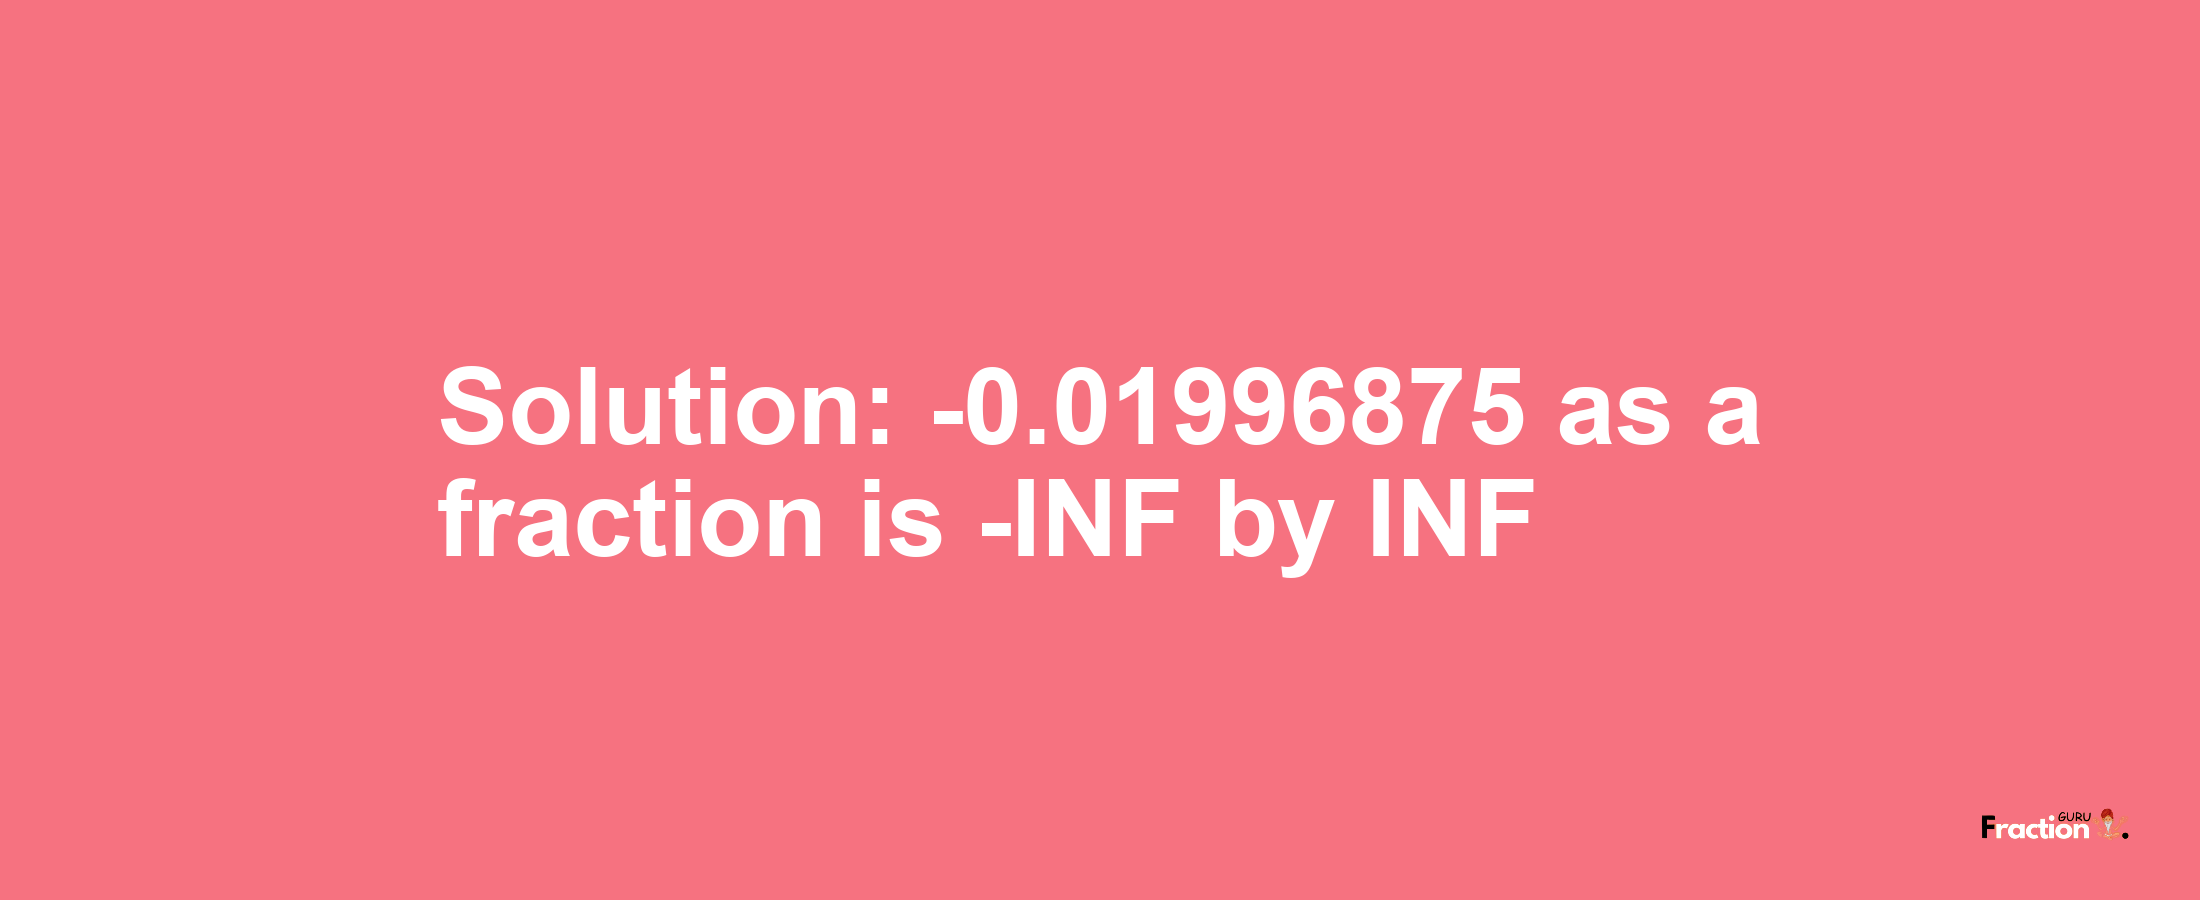 Solution:-0.01996875 as a fraction is -INF/INF